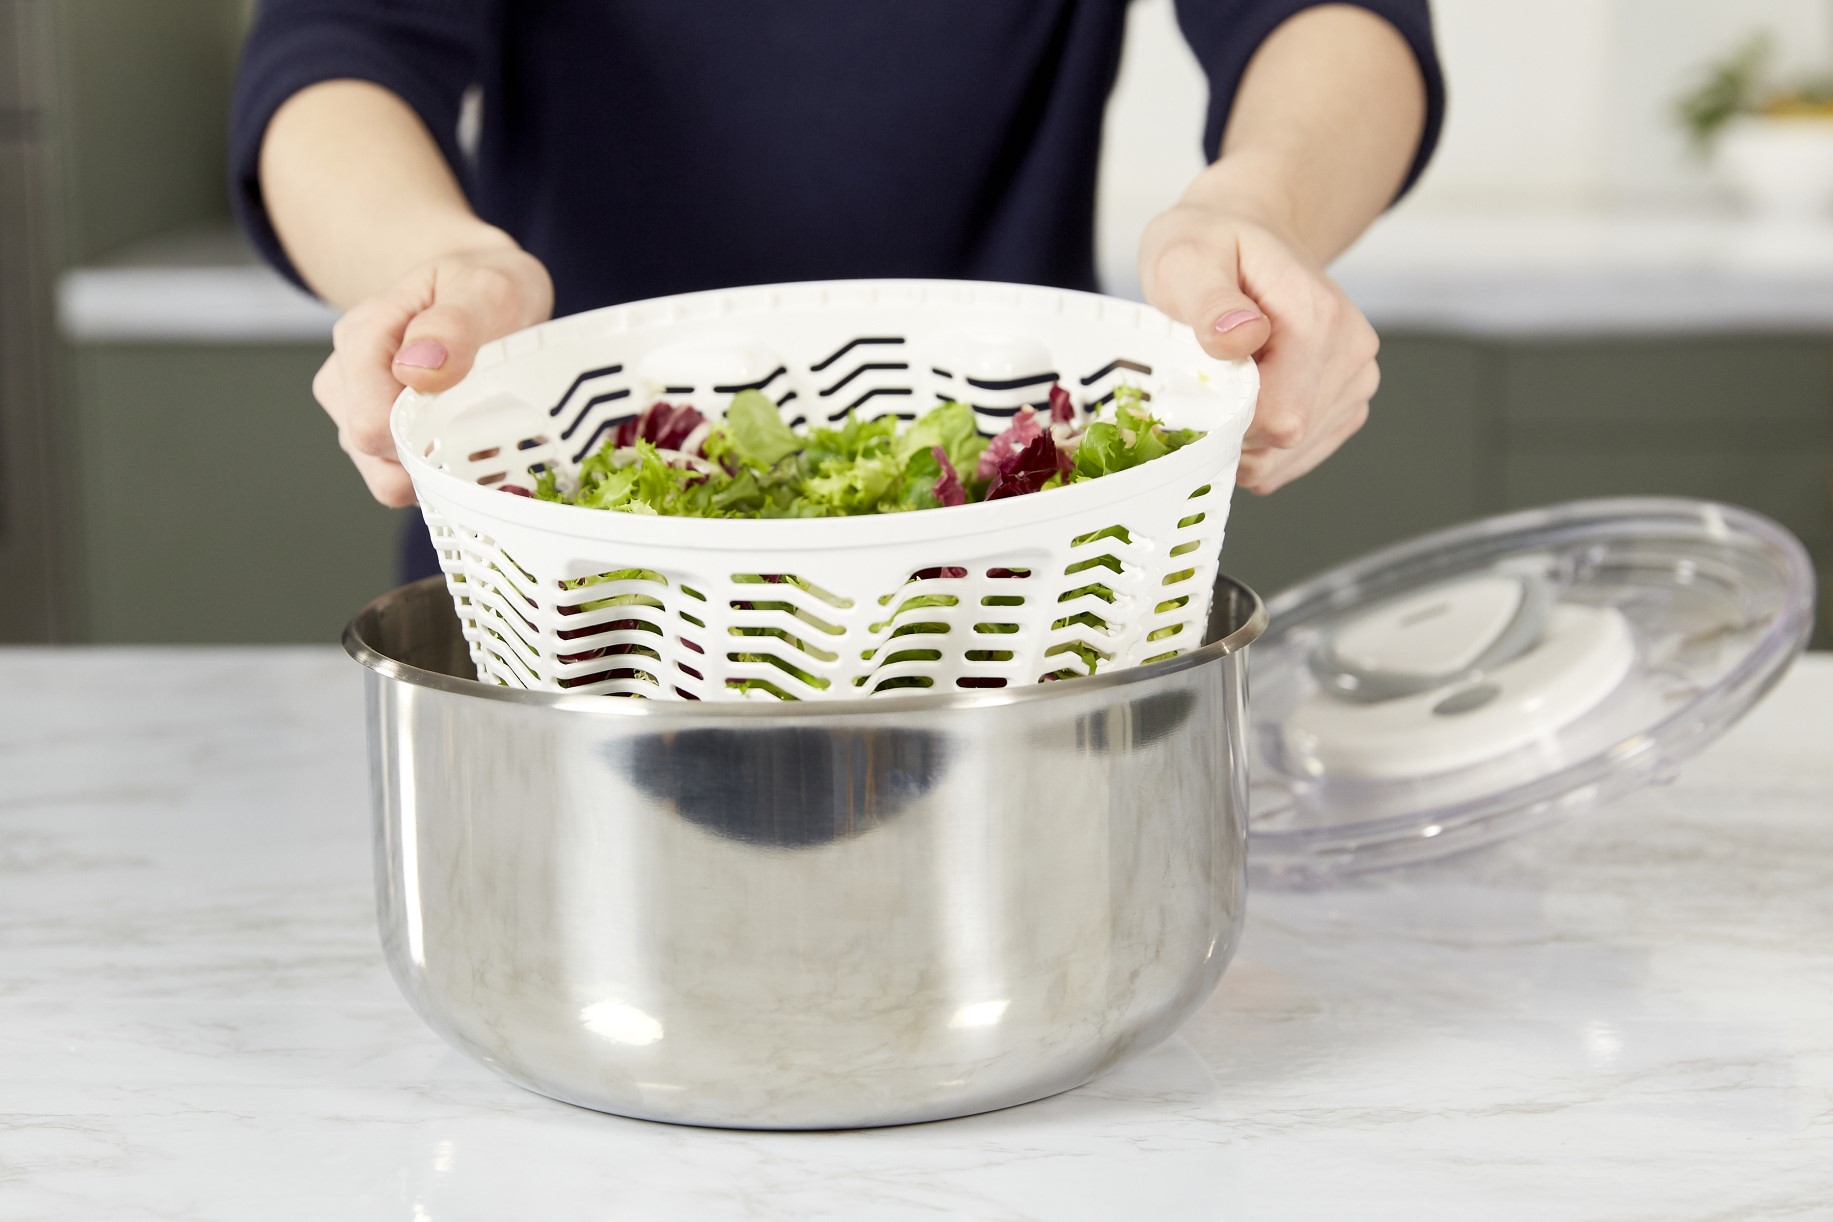 Zyliss Easy Spin 2 Stainless Steel Salad Spinner and Vegetable Washer with Silver Steel Serving Bowl 2.31 lb - image 5 of 6